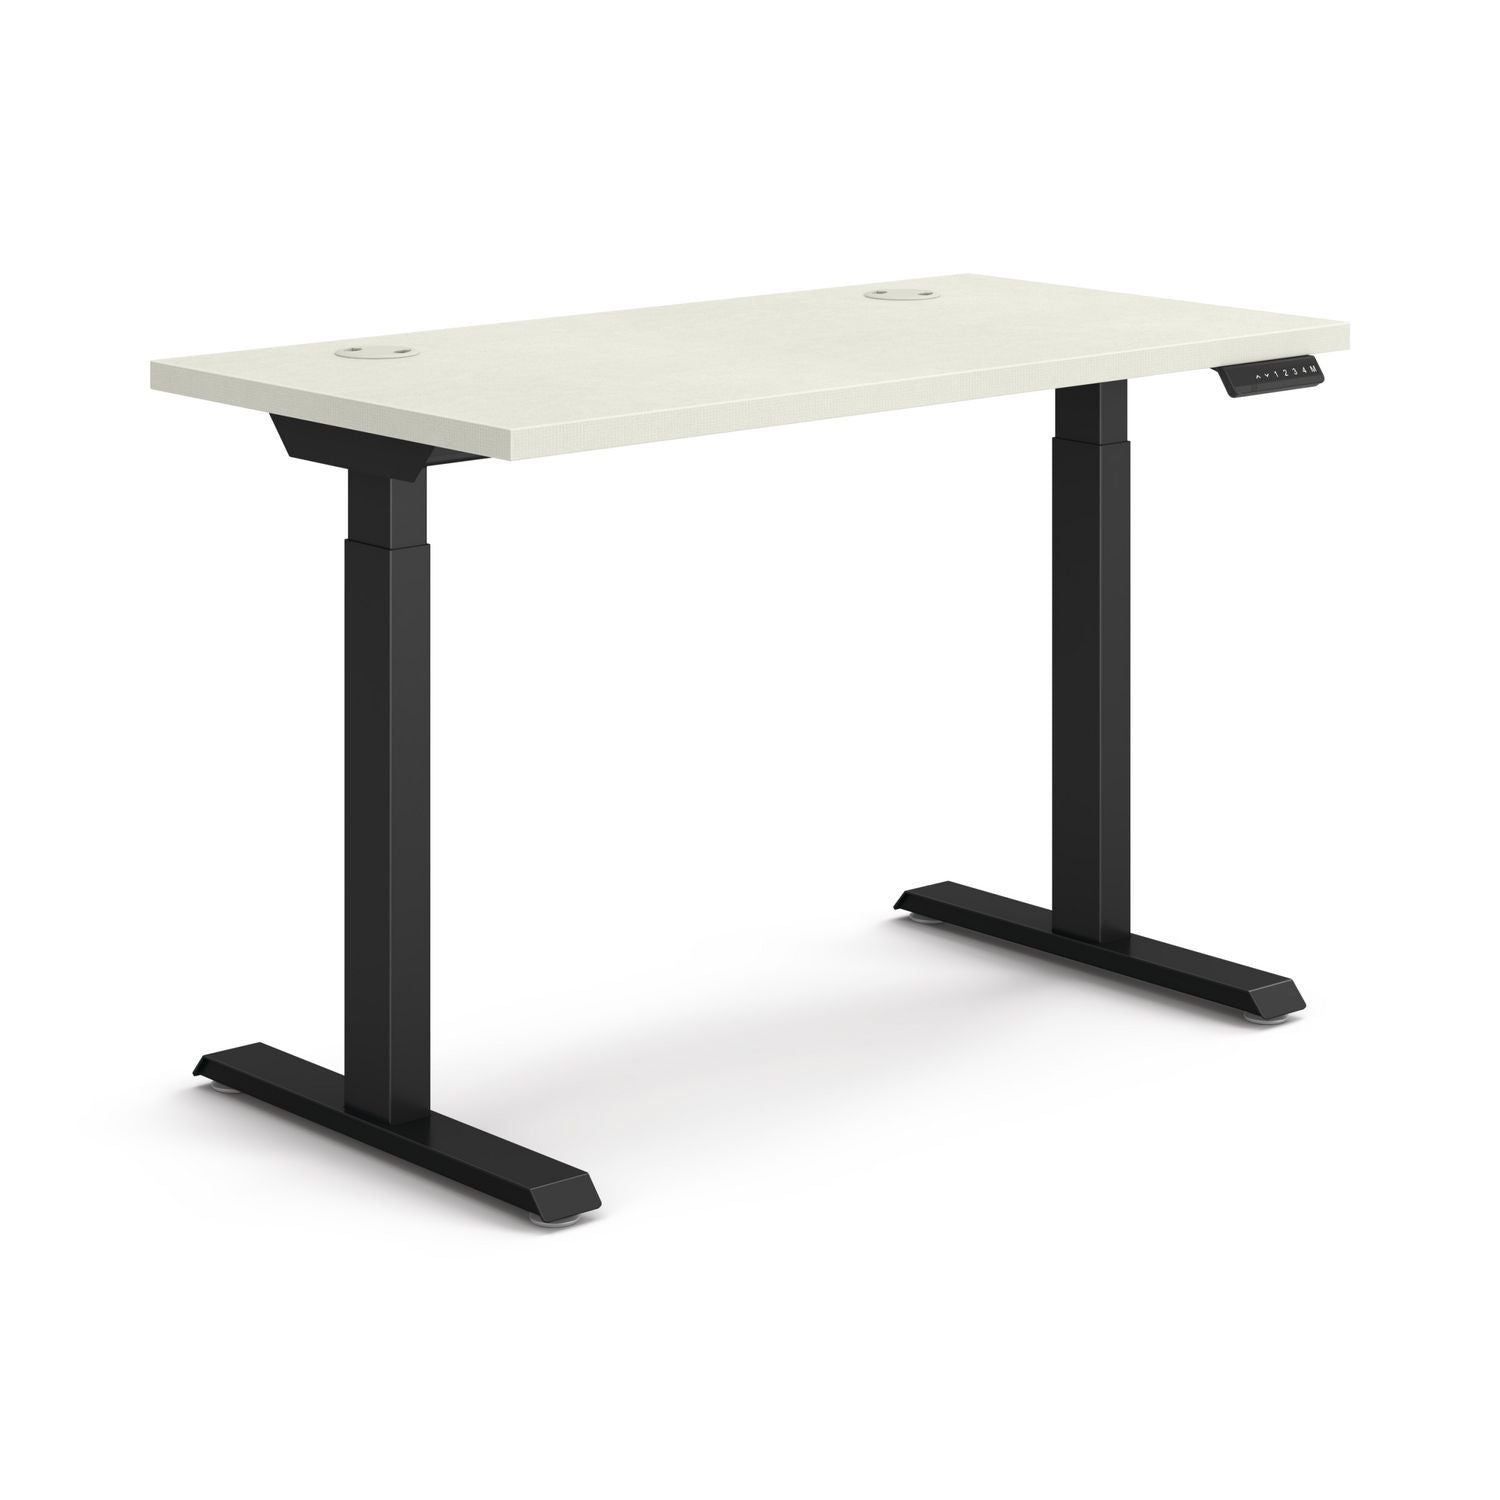 coordinate-height-adjustable-desk-bundle-2-stage-46-x-22-x-2775-to-47-silver-mesh\\black-ships-in-7-10-business-days_honhat2smbk2246 - 1